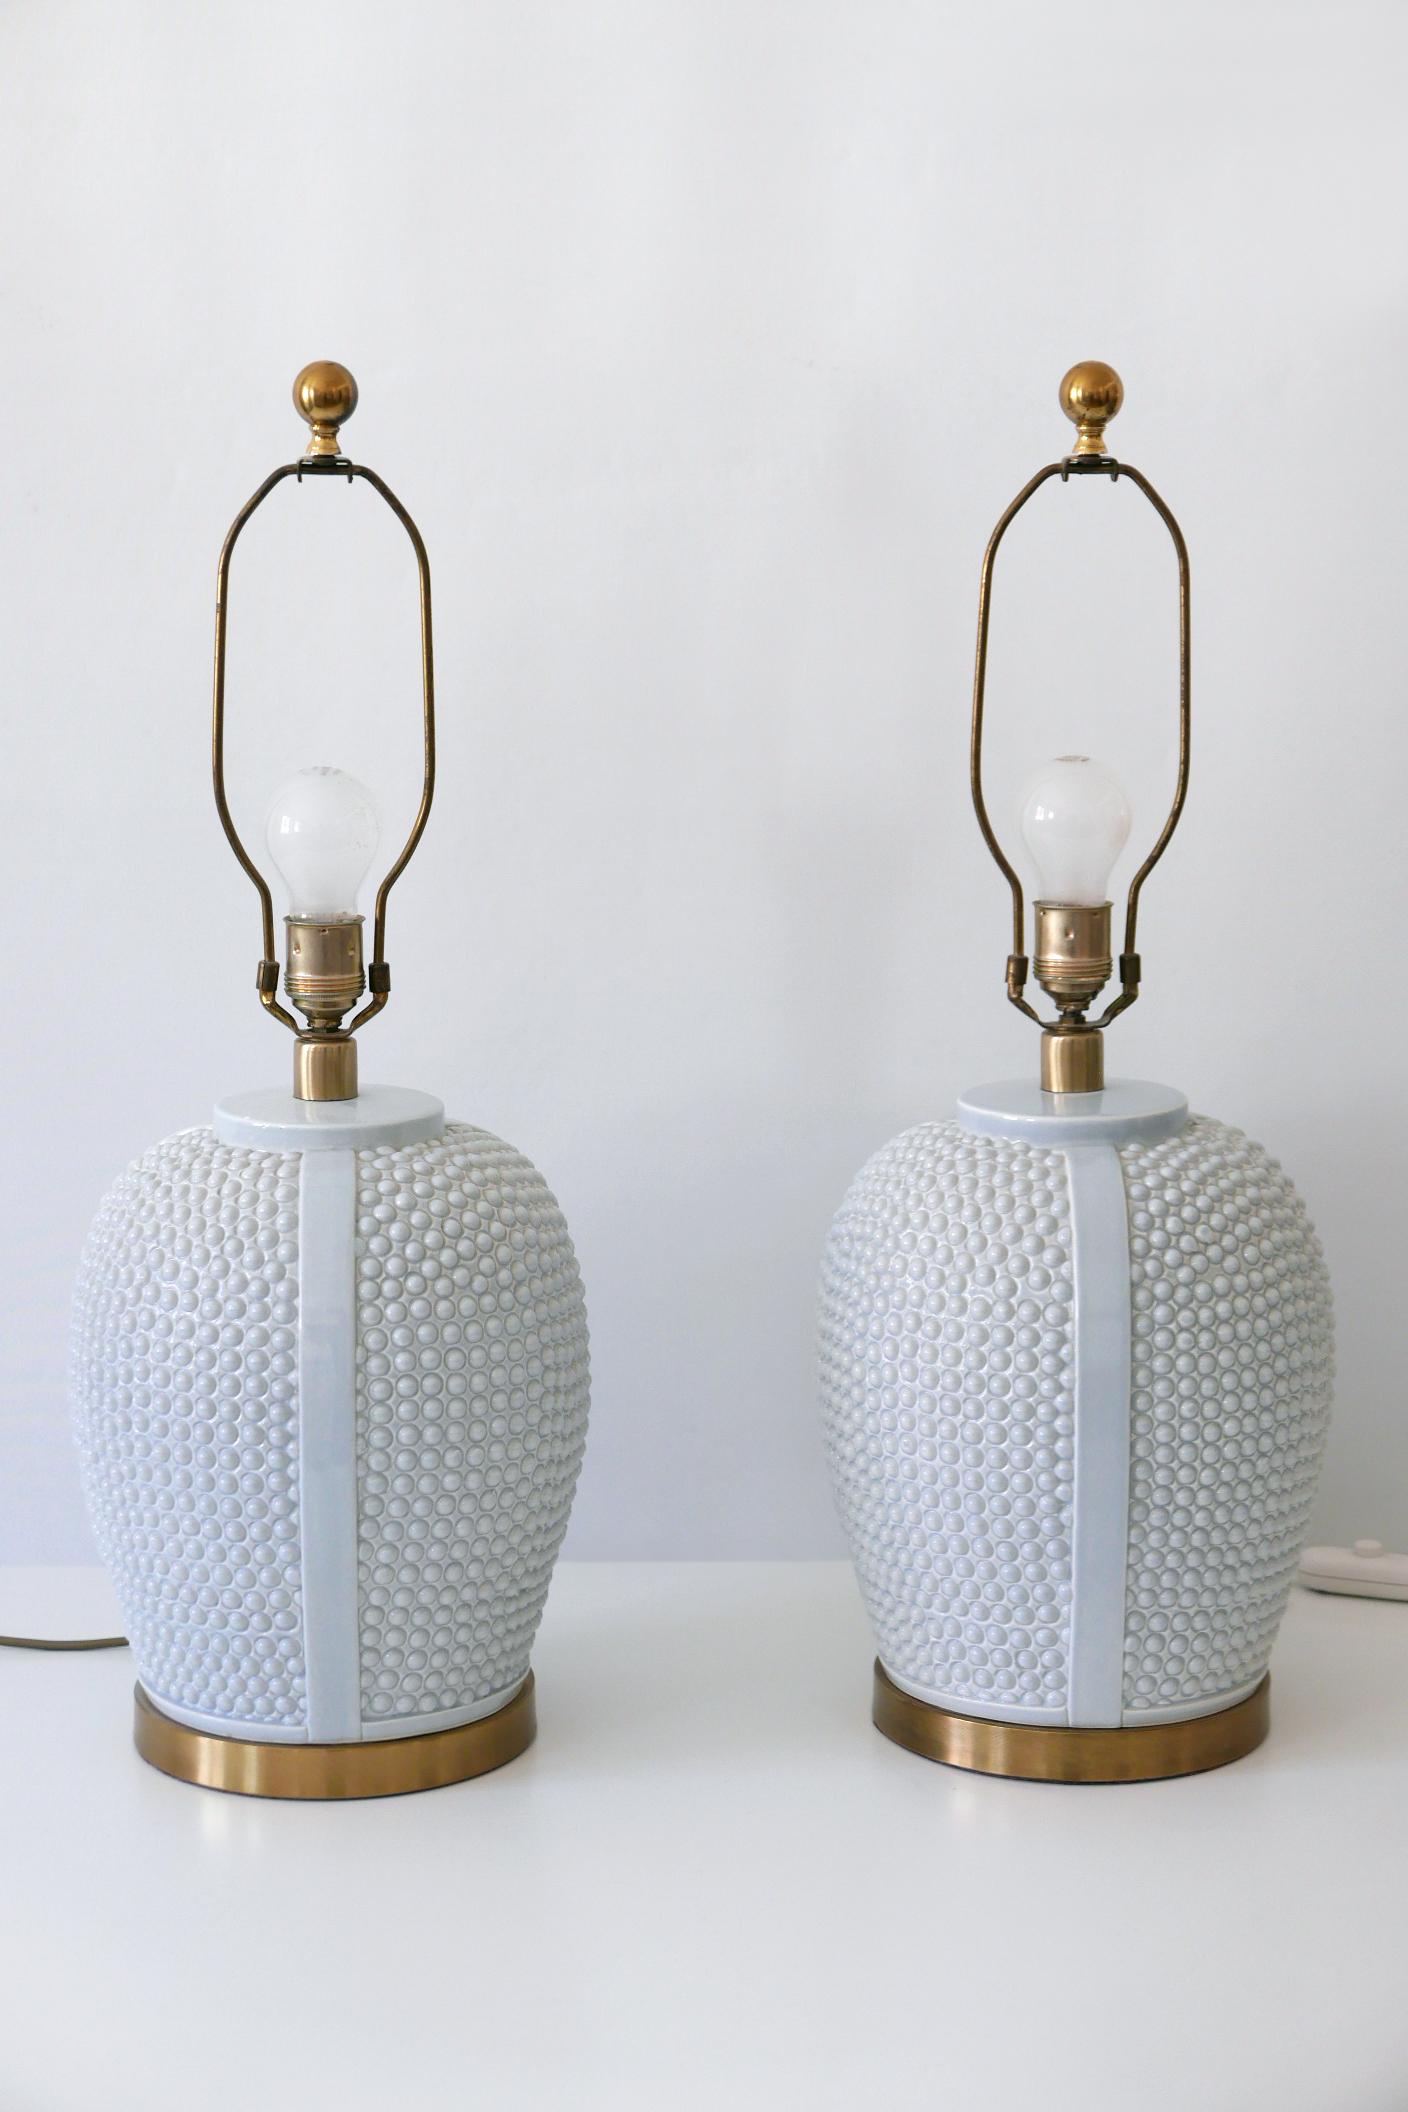 Set of Two Exceptional Mid-Century Modern Ceramic Table Lamps, 1960s, Germany For Sale 6